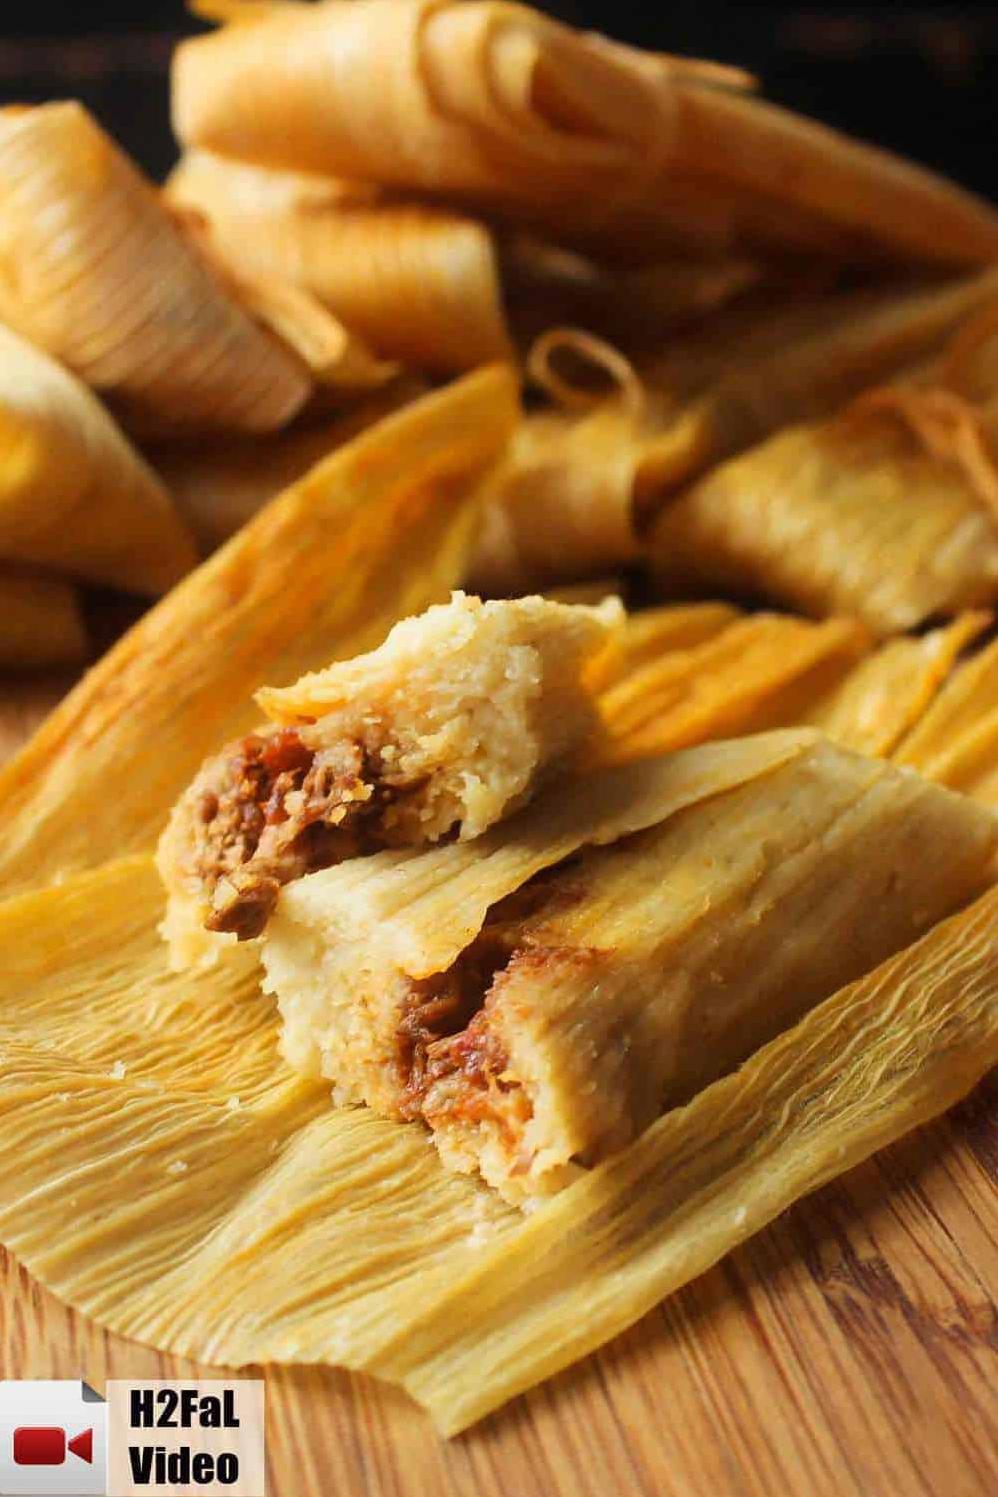  Hot and juicy tamales for a perfect feast!